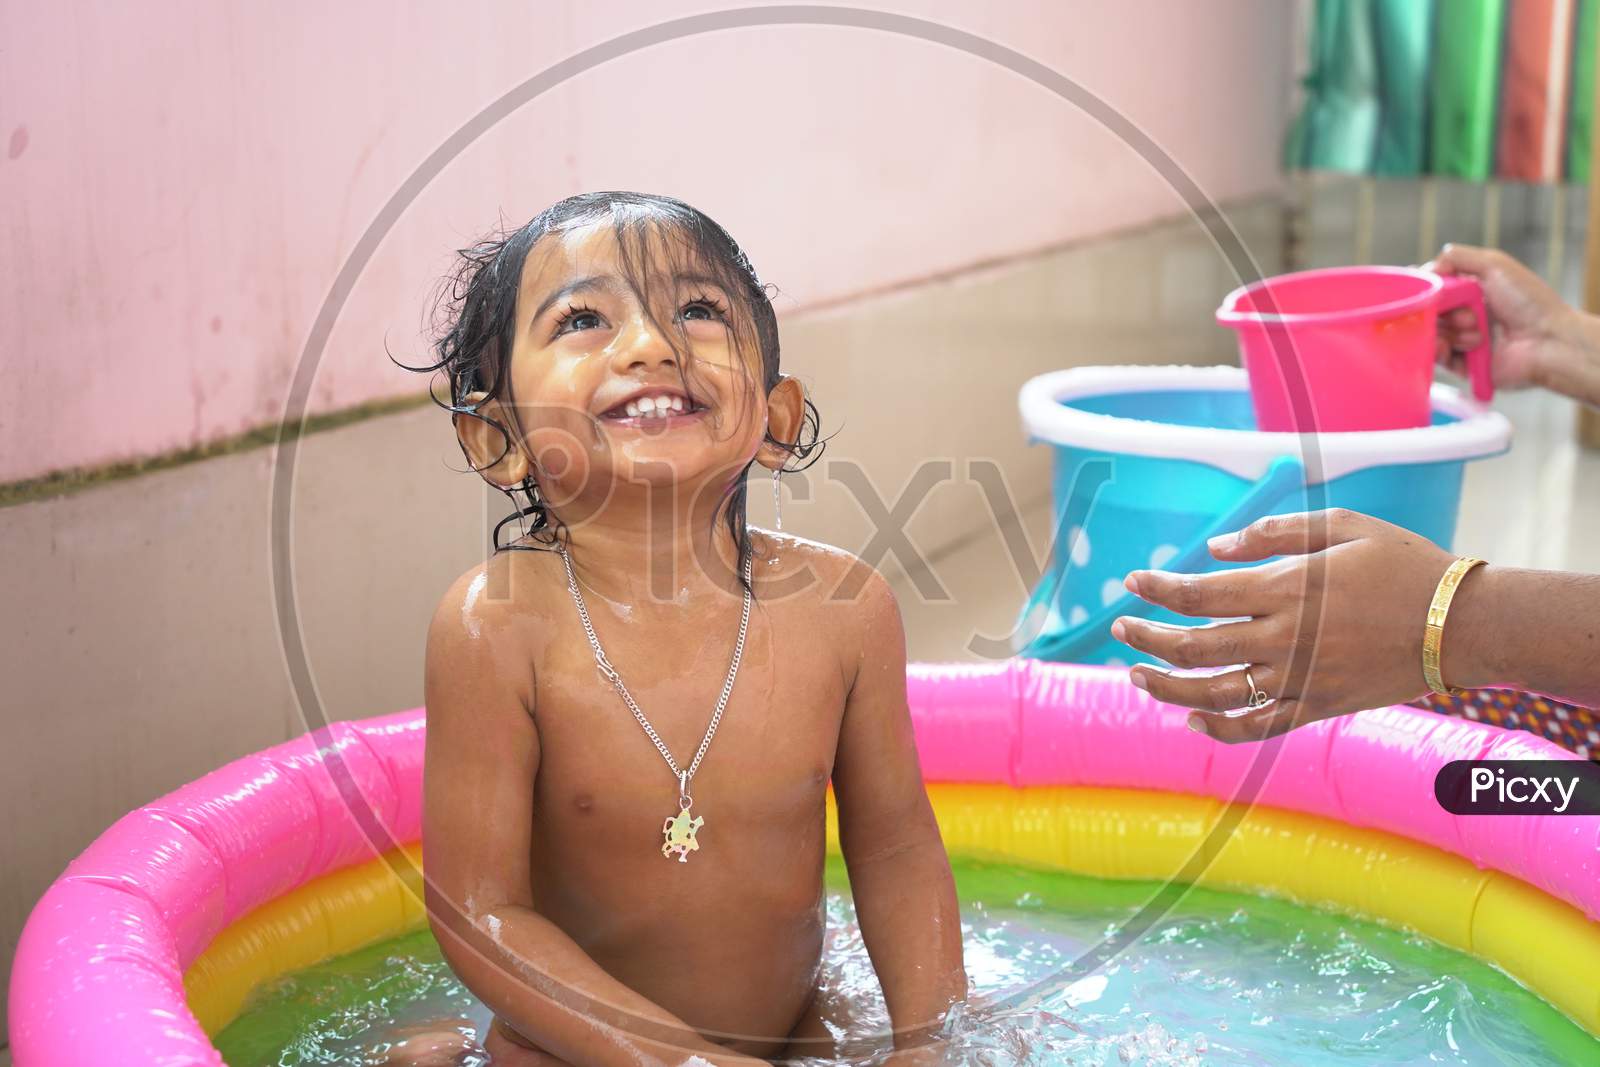 indian baby boy enjoying bath in an inflatable pool with water splashing and float toys.